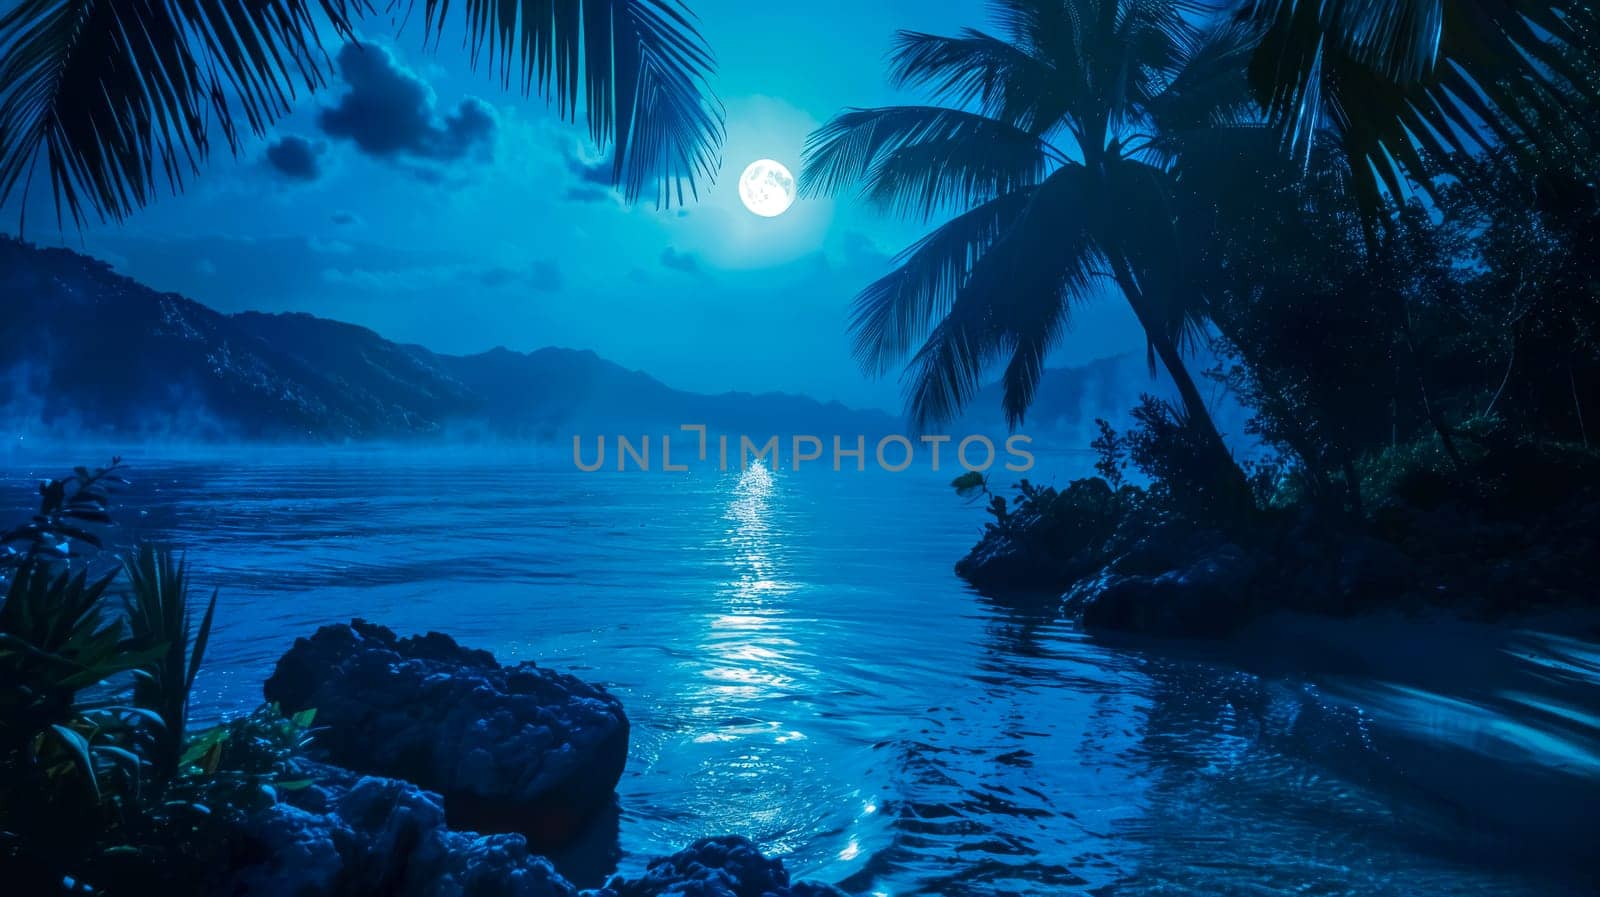 Tropical moonlit night by the river by Edophoto